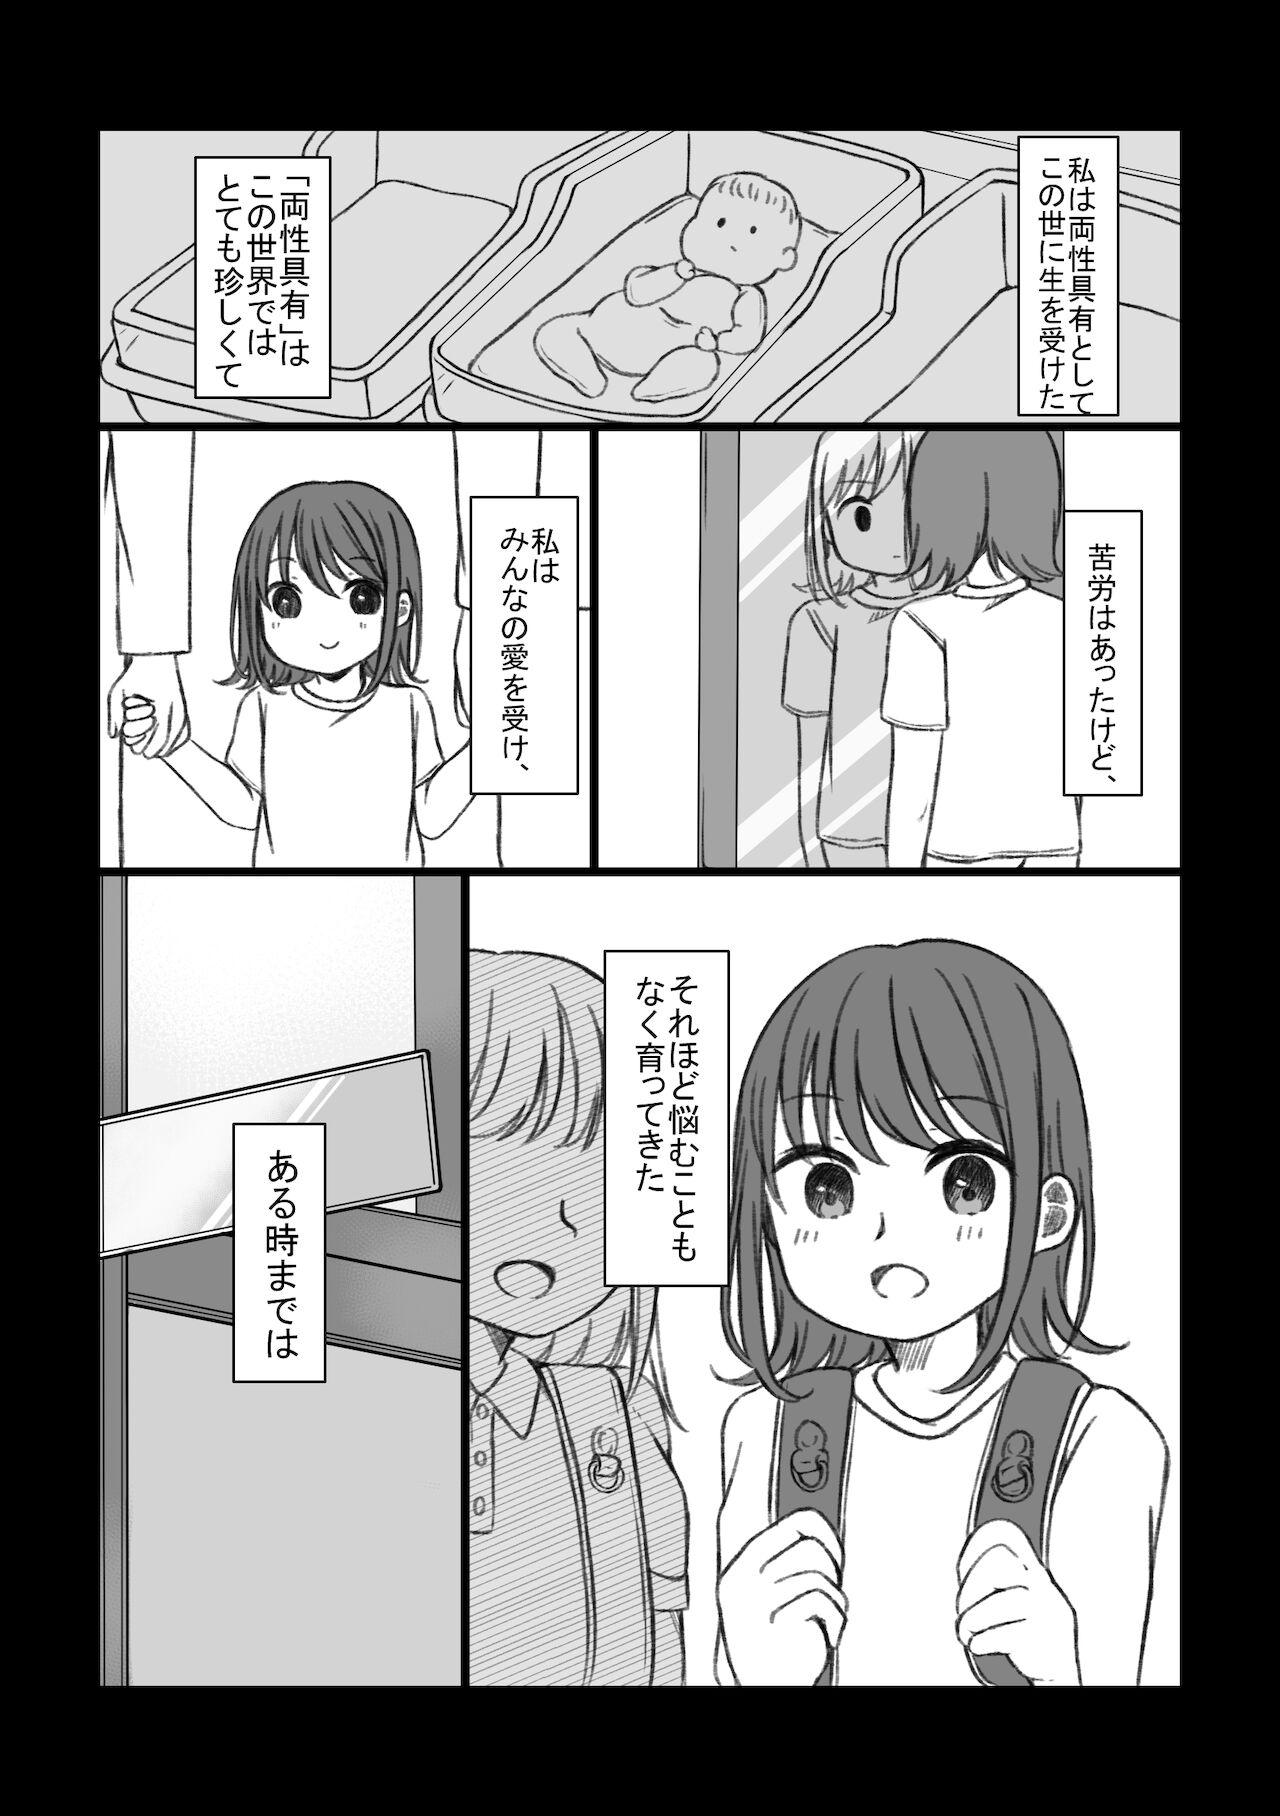 Swallow 恋するちん子はまだ夢のなか Gros Seins - Page 4